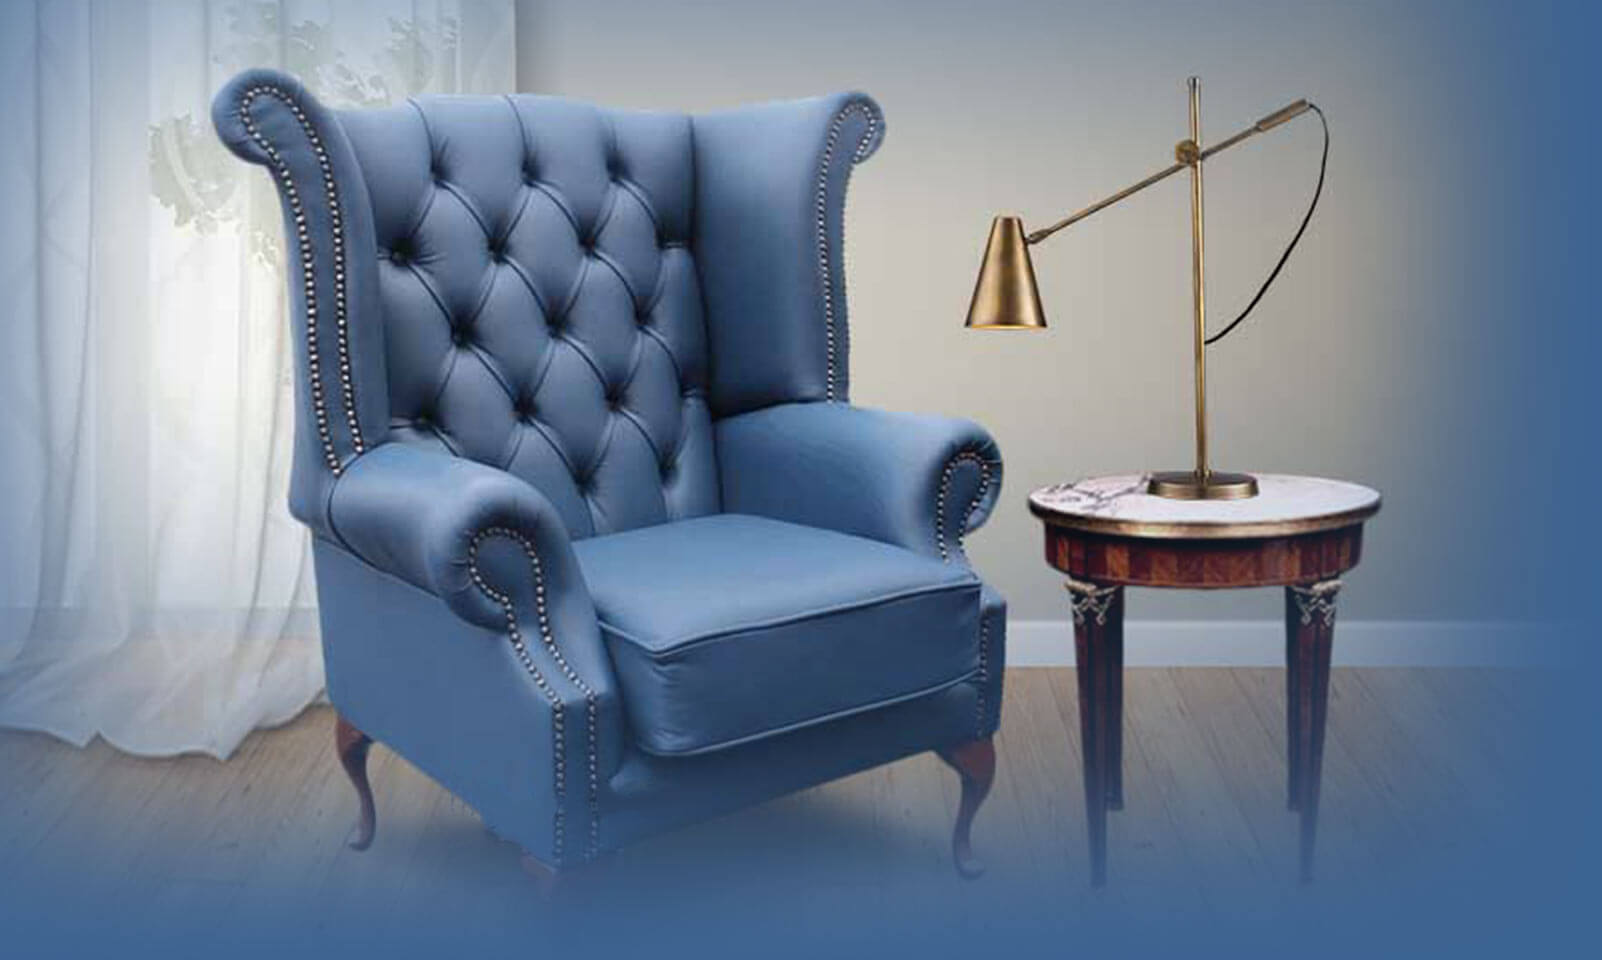 Chesterfield Wing Chairs – Handcrafted in the UK